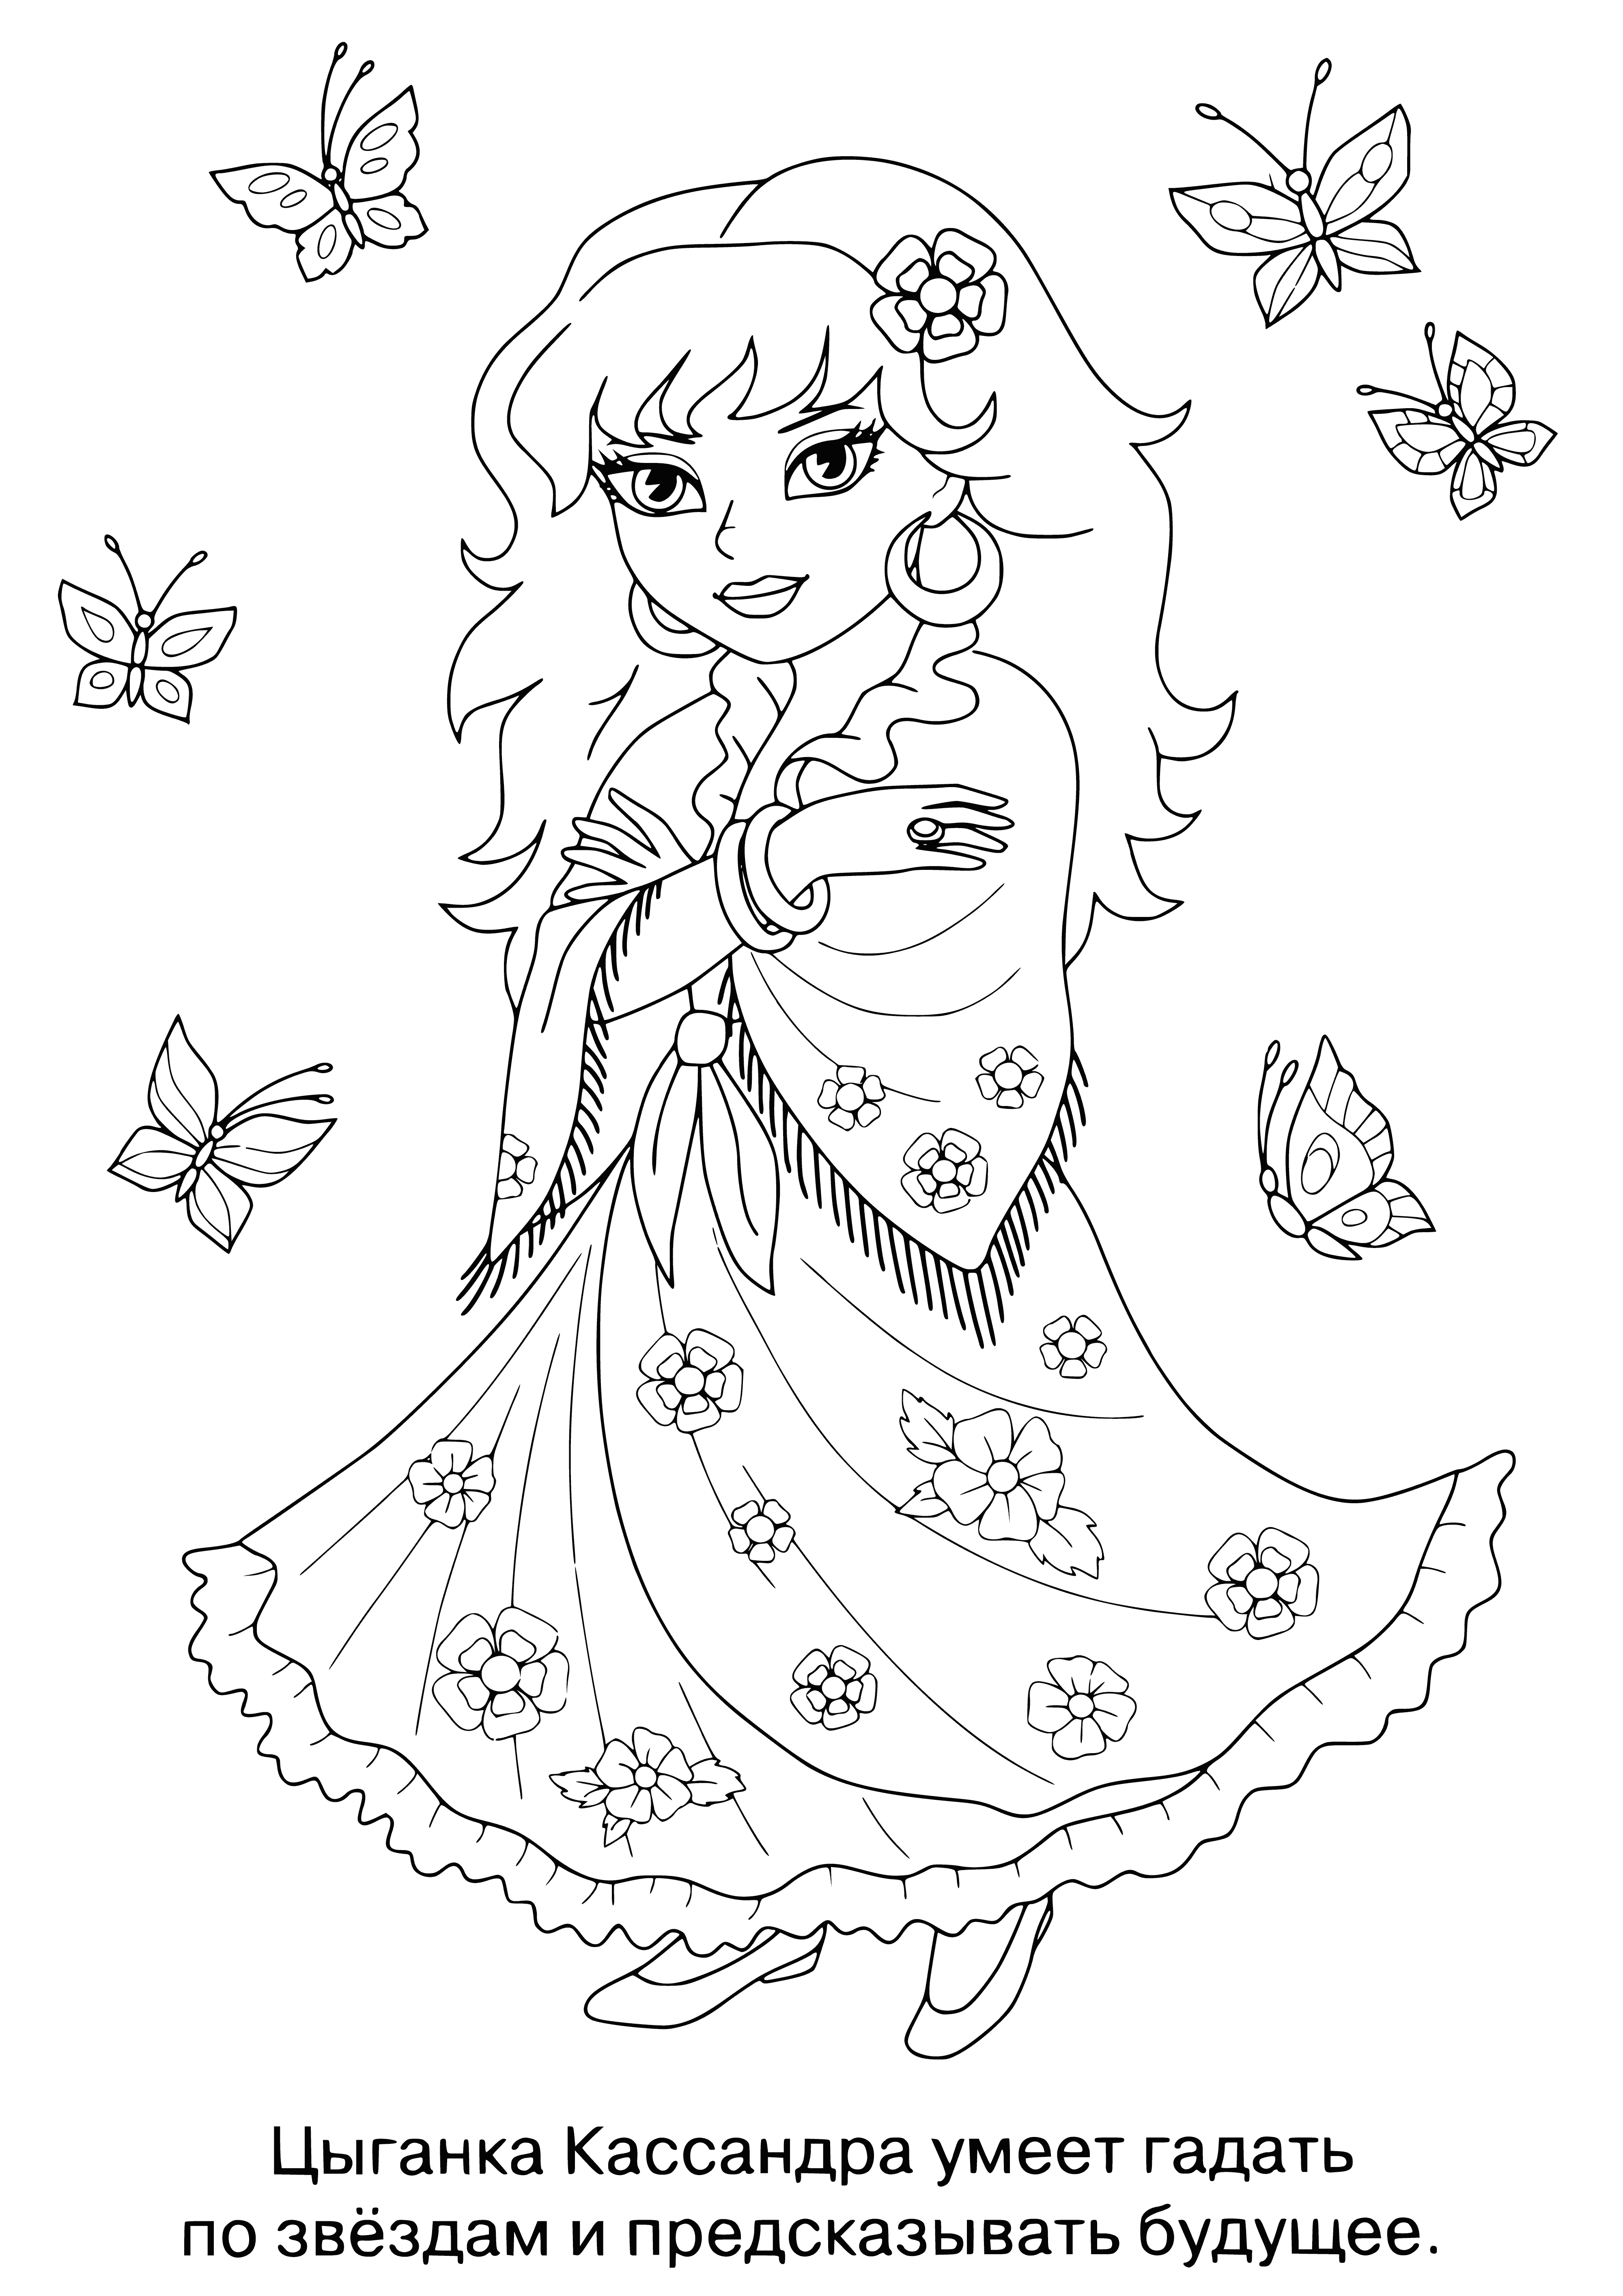 Gypsy Cassandra coloring page